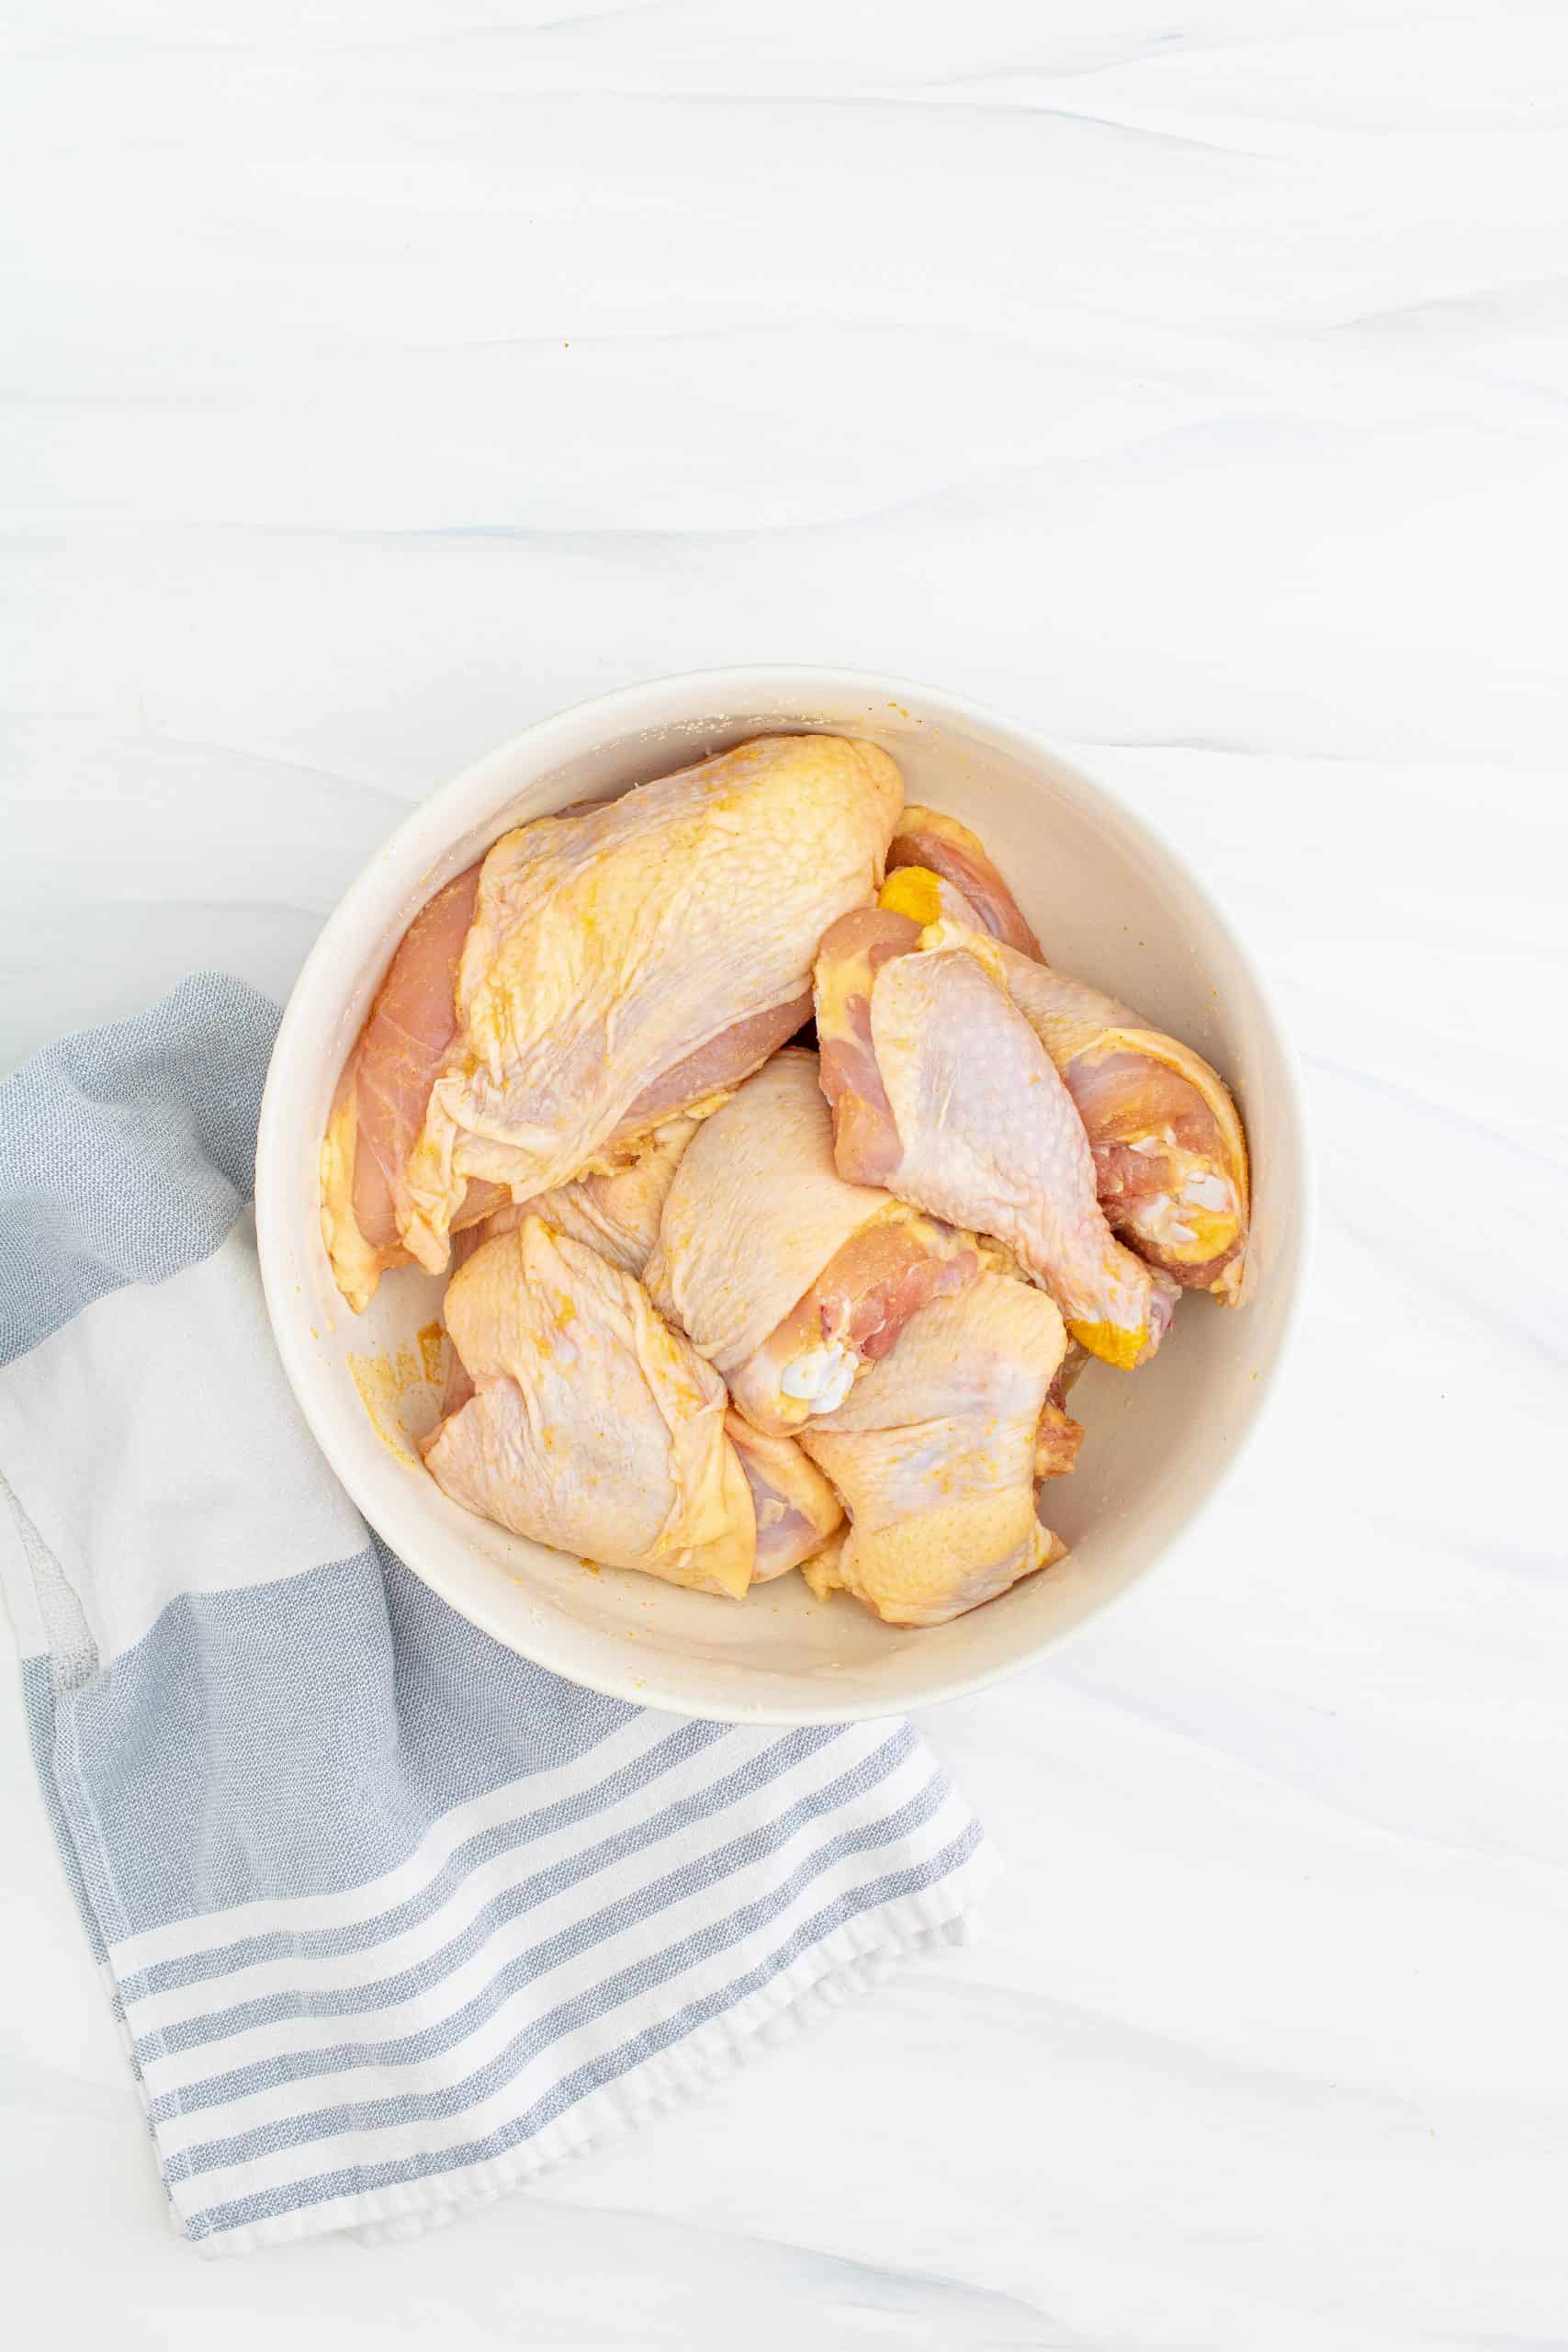 cut up chicken in a white bowl.